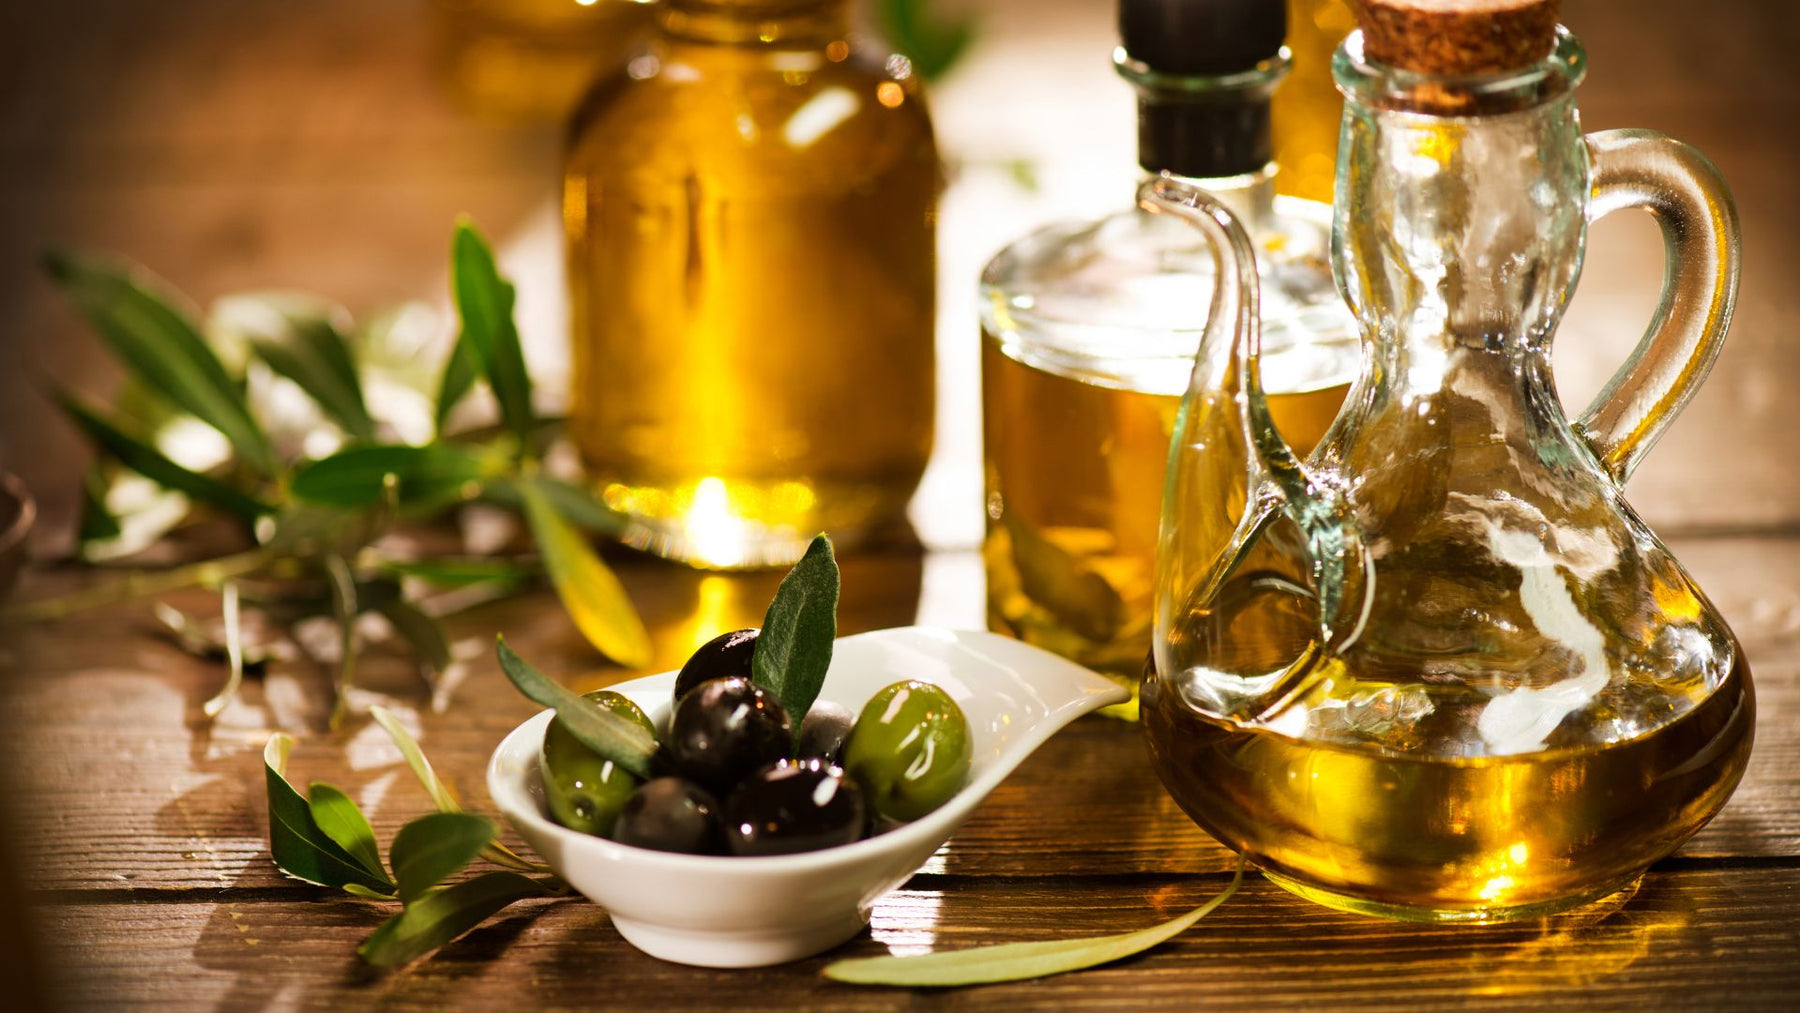 A Guide To Carter And Coles' Olive Oils